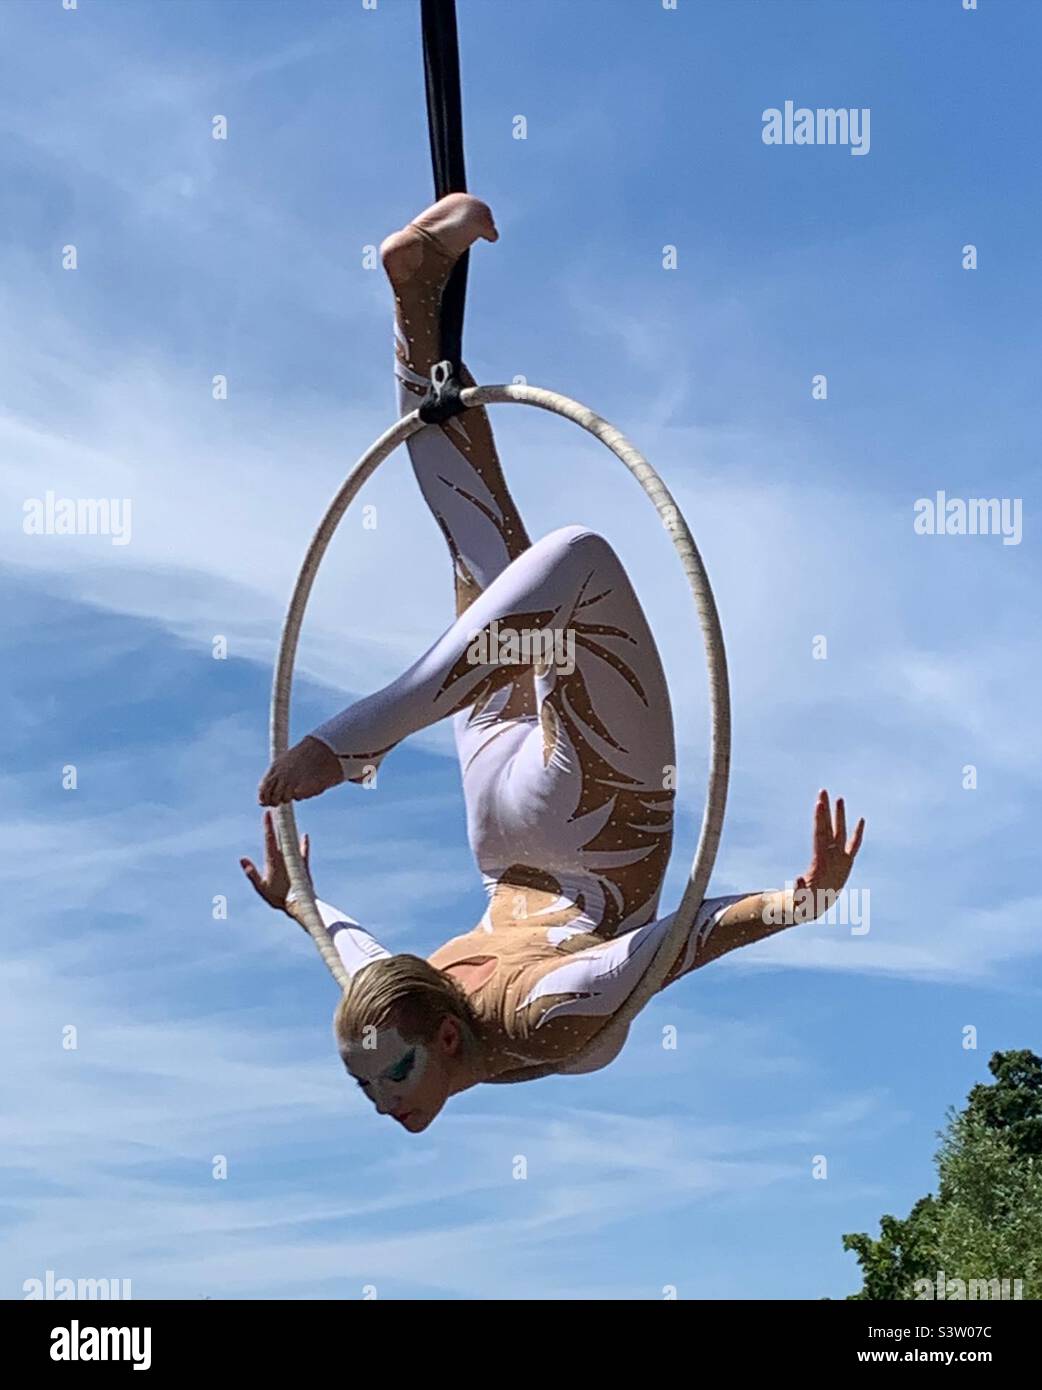 Female acrobat on suspended hula hoop in the park Stock Photo